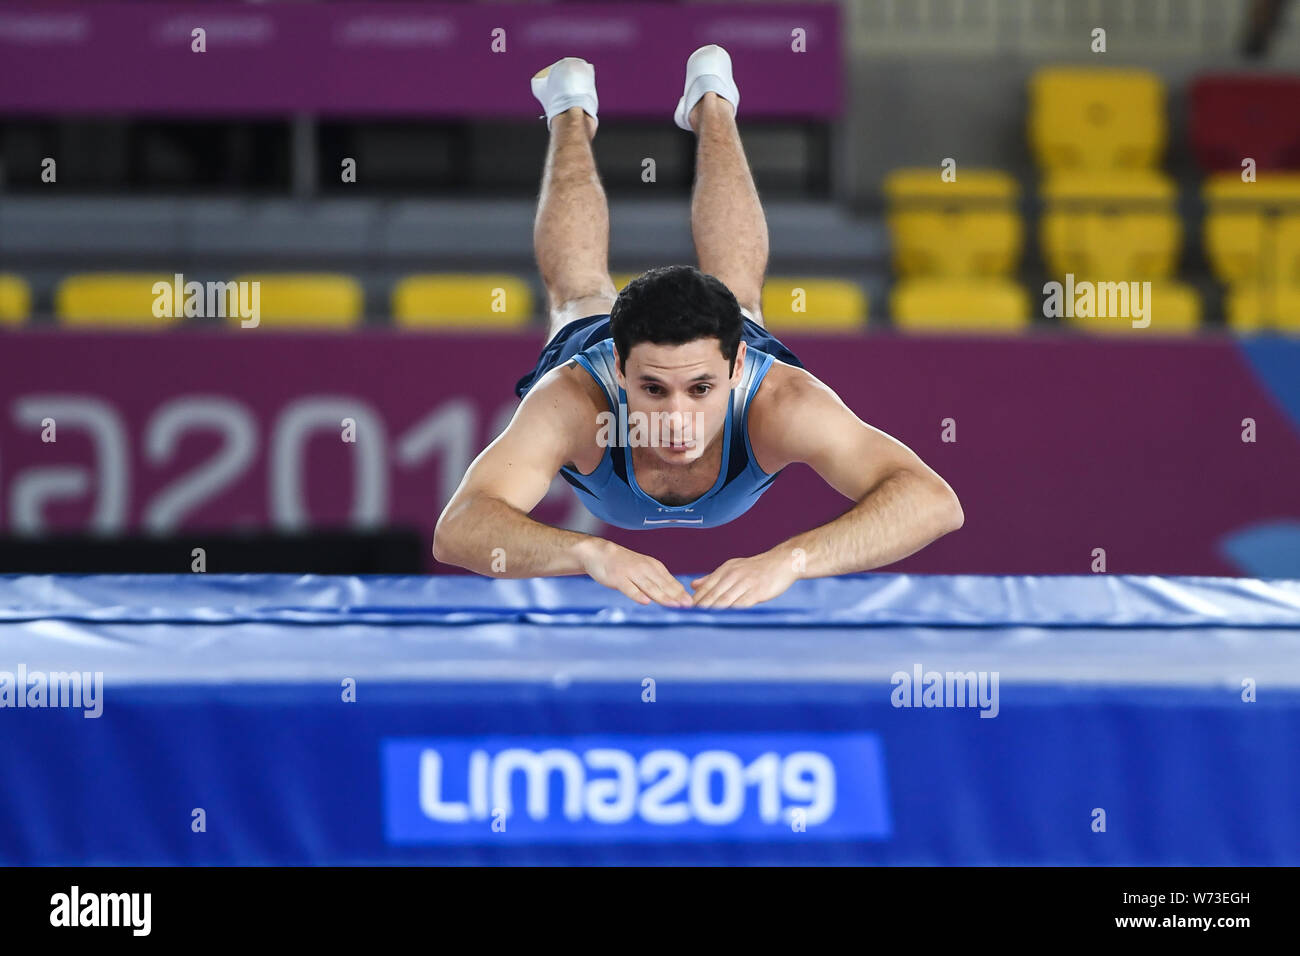 Lima, Peru. 4th Aug, 2019. LUCAS ADORNO from Argentina prepares to bounce on his stomach on the trampoline during the competition held in the Polideportivo Villa El Salvador in Lima, Peru. Credit: Amy Sanderson/ZUMA Wire/Alamy Live News Stock Photo